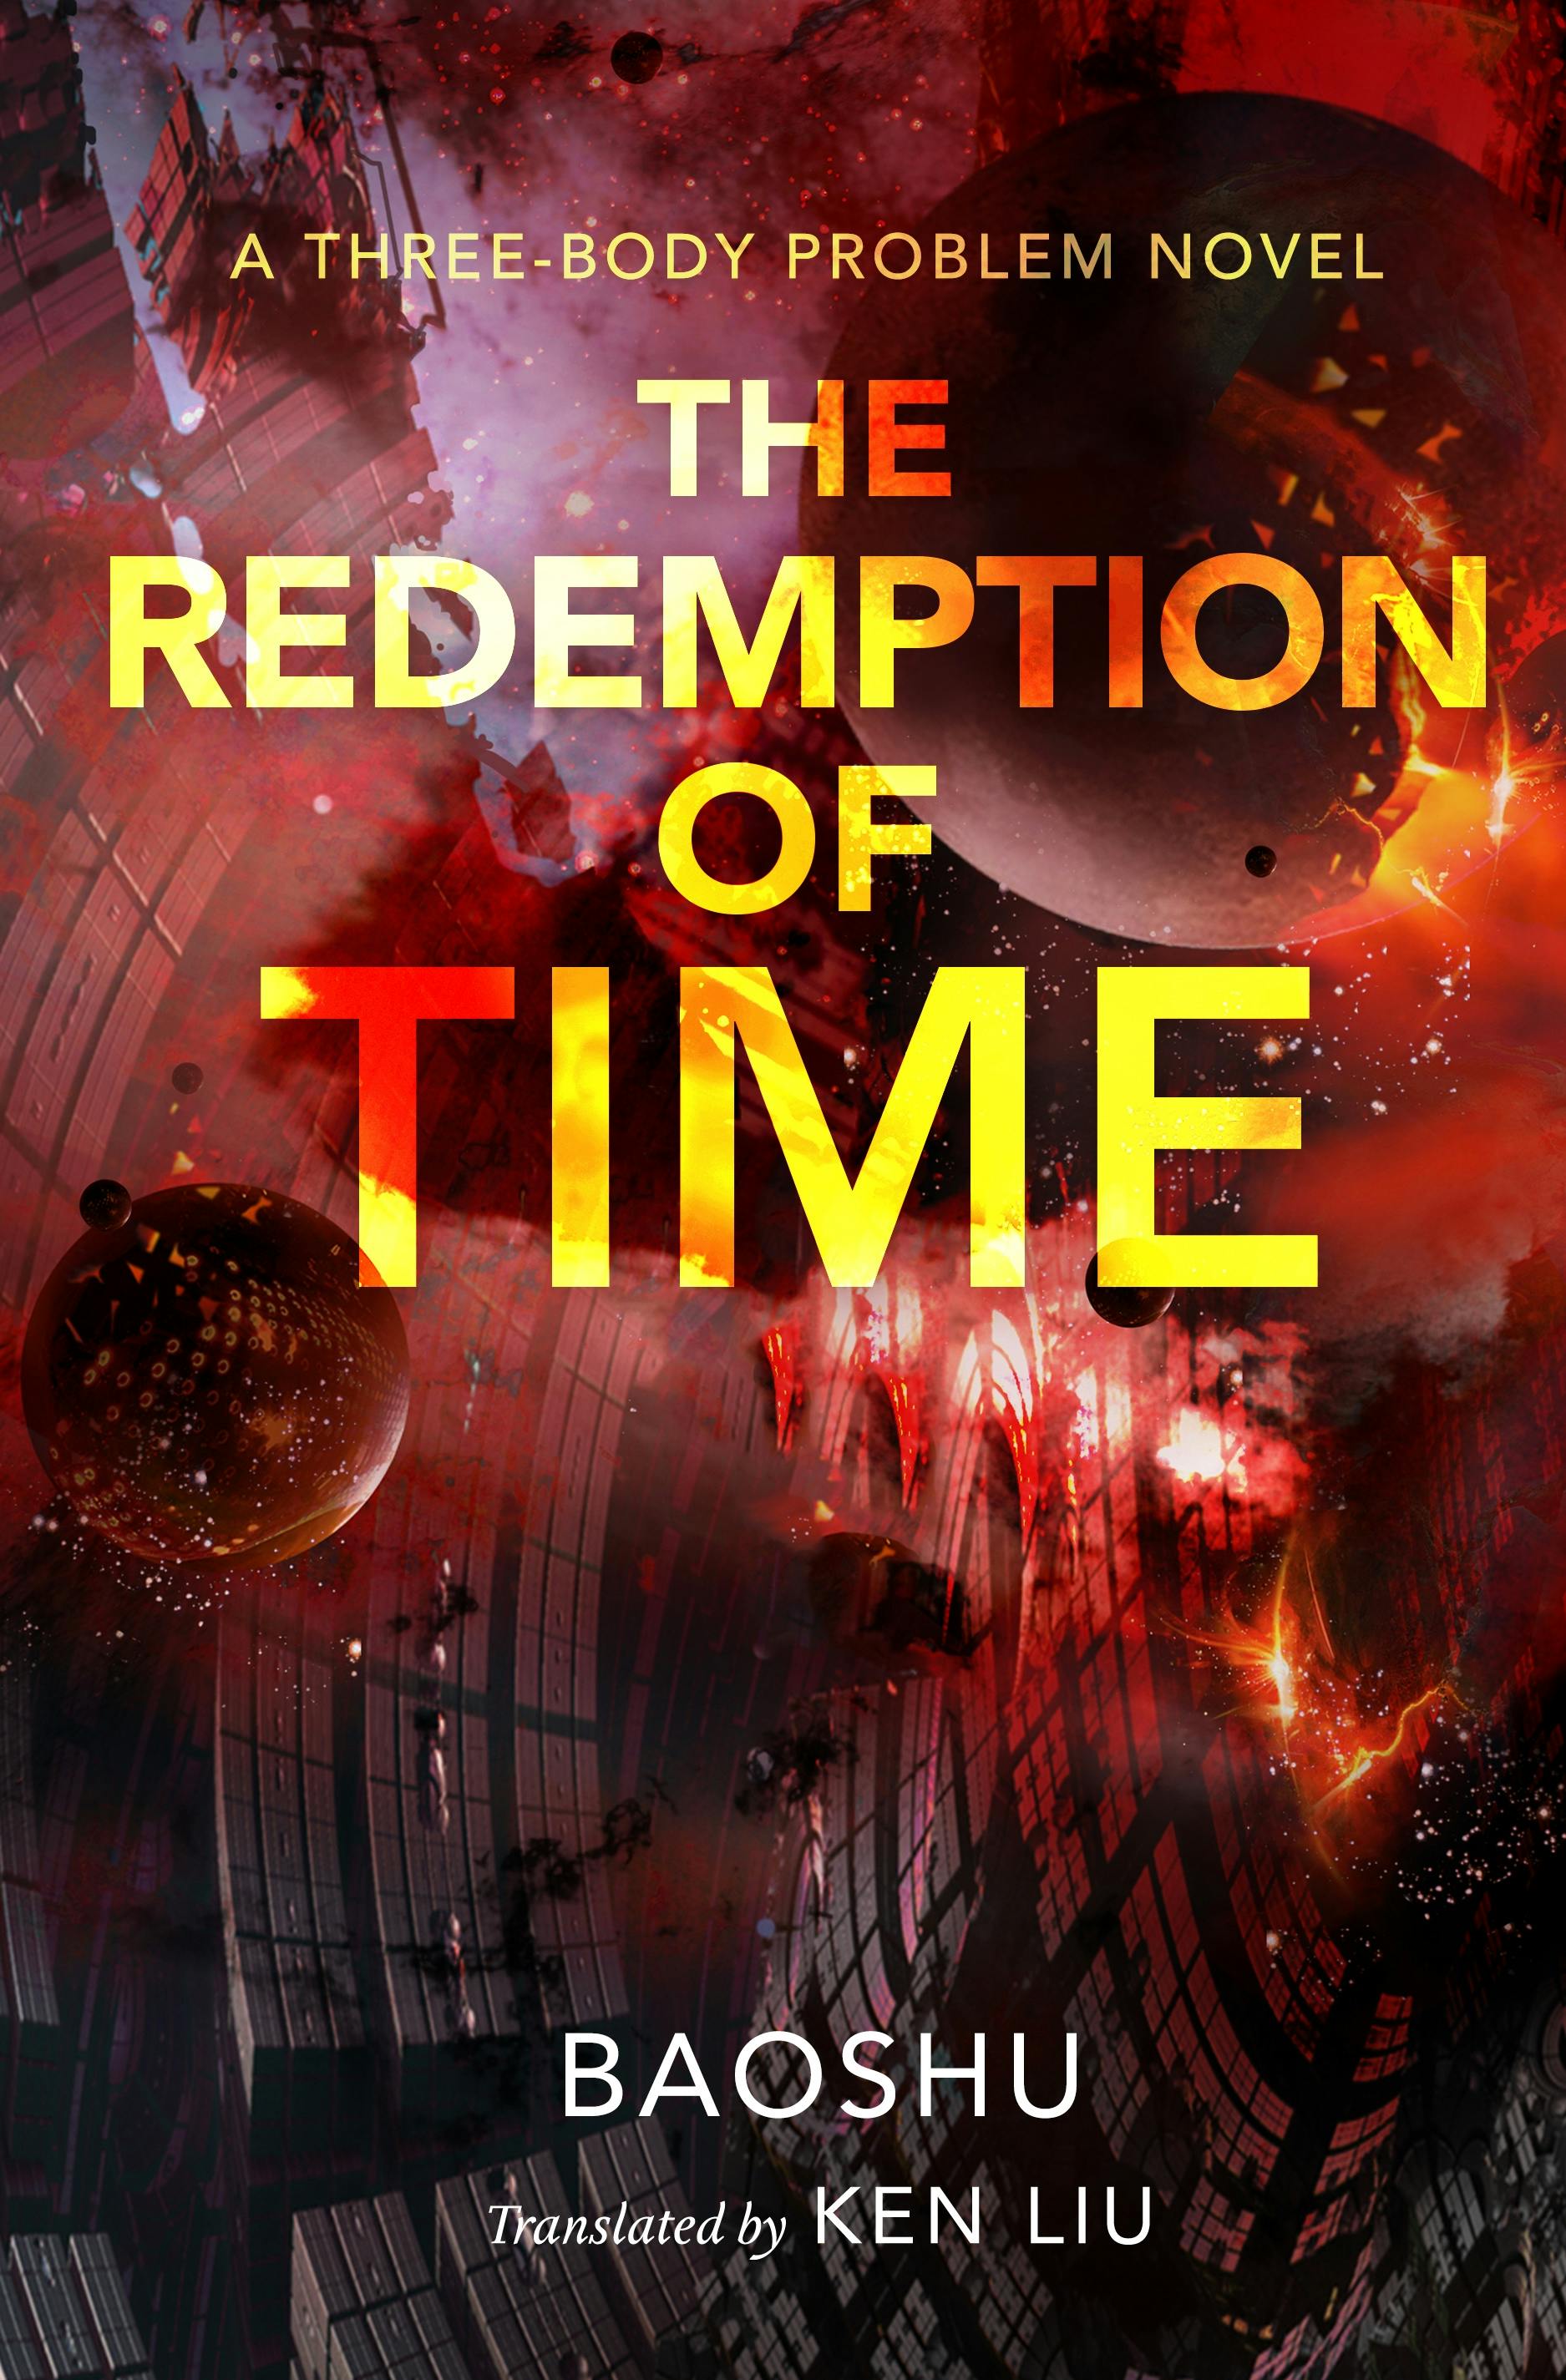 Cover for the book titled as: The Redemption of Time